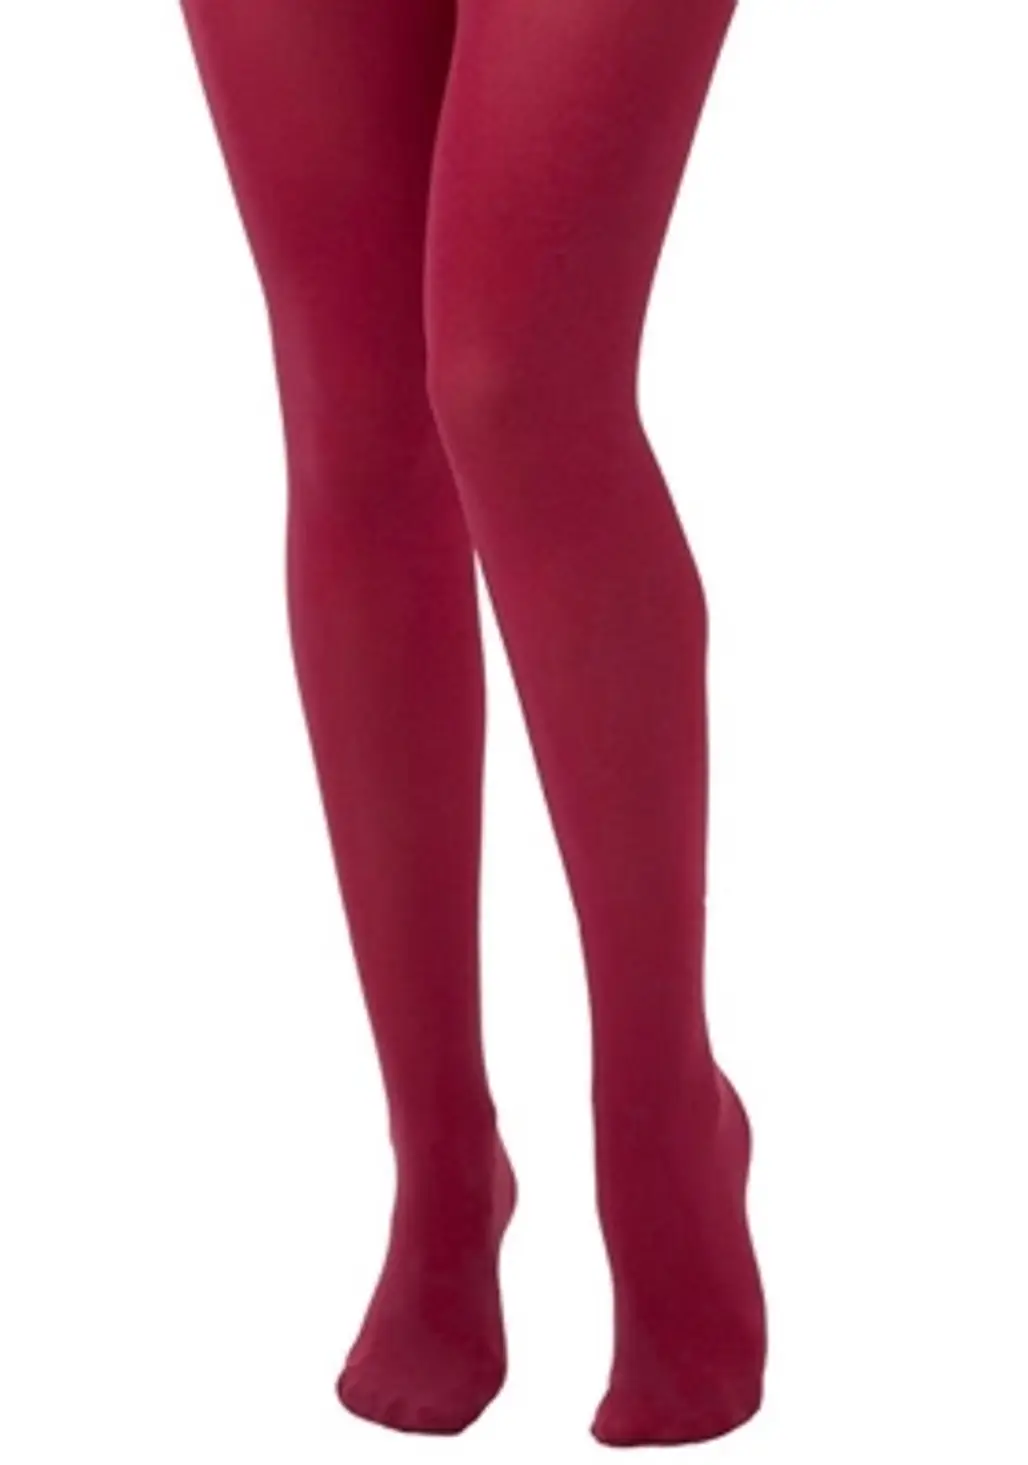 Modcloth Tights in Rose